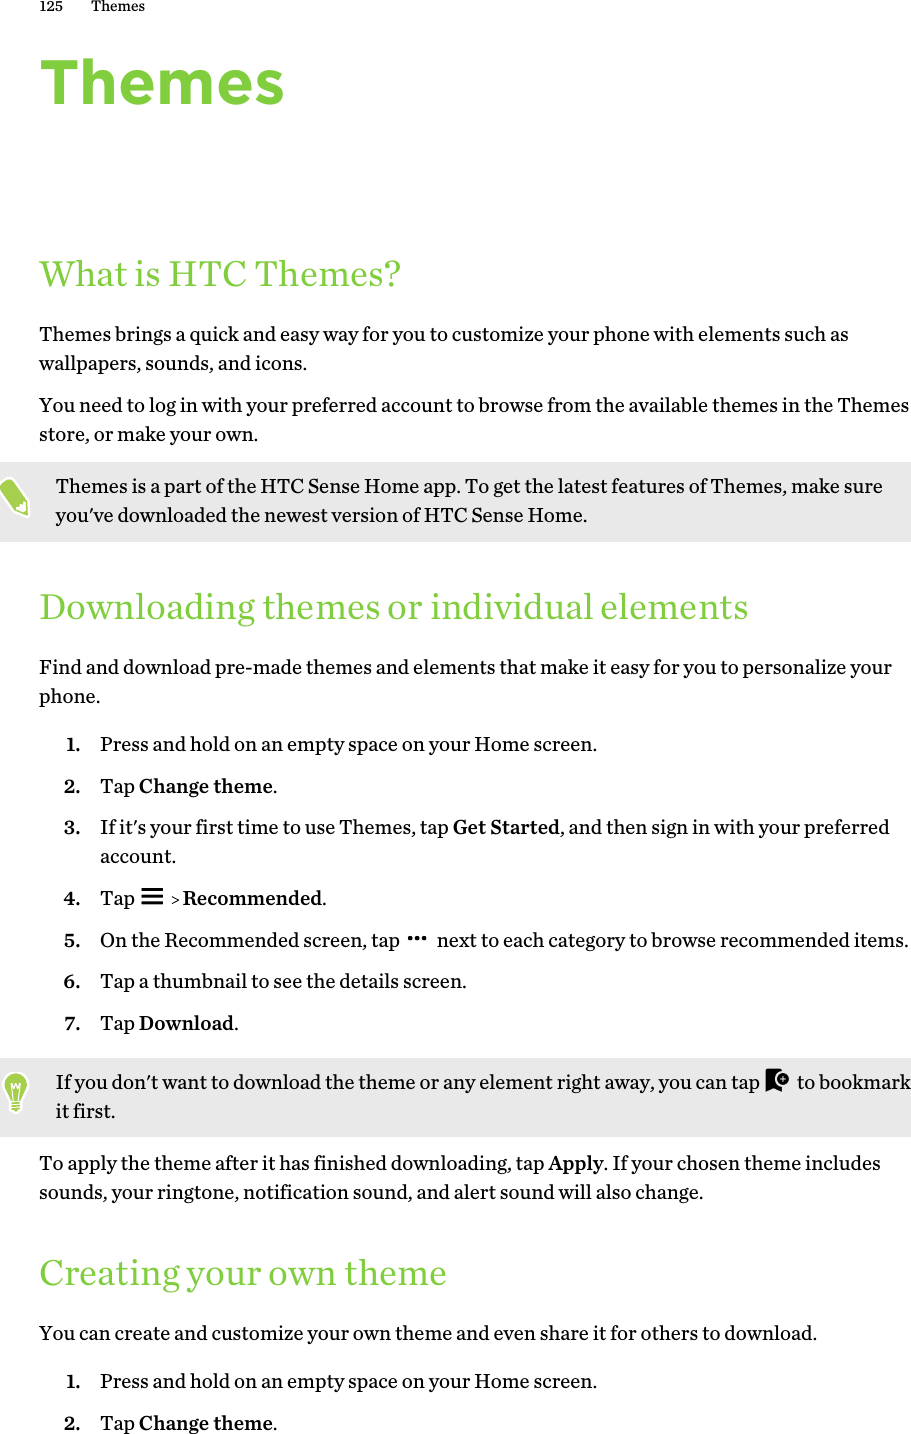 ThemesWhat is HTC Themes?Themes brings a quick and easy way for you to customize your phone with elements such aswallpapers, sounds, and icons.You need to log in with your preferred account to browse from the available themes in the Themesstore, or make your own.Themes is a part of the HTC Sense Home app. To get the latest features of Themes, make sureyou&apos;ve downloaded the newest version of HTC Sense Home.Downloading themes or individual elementsFind and download pre-made themes and elements that make it easy for you to personalize yourphone.1. Press and hold on an empty space on your Home screen.2. Tap Change theme.3. If it&apos;s your first time to use Themes, tap Get Started, and then sign in with your preferredaccount.4. Tap     Recommended.5. On the Recommended screen, tap   next to each category to browse recommended items.6. Tap a thumbnail to see the details screen.7. Tap Download.If you don&apos;t want to download the theme or any element right away, you can tap   to bookmarkit first.To apply the theme after it has finished downloading, tap Apply. If your chosen theme includessounds, your ringtone, notification sound, and alert sound will also change.Creating your own themeYou can create and customize your own theme and even share it for others to download.1. Press and hold on an empty space on your Home screen.2. Tap Change theme.125 Themes